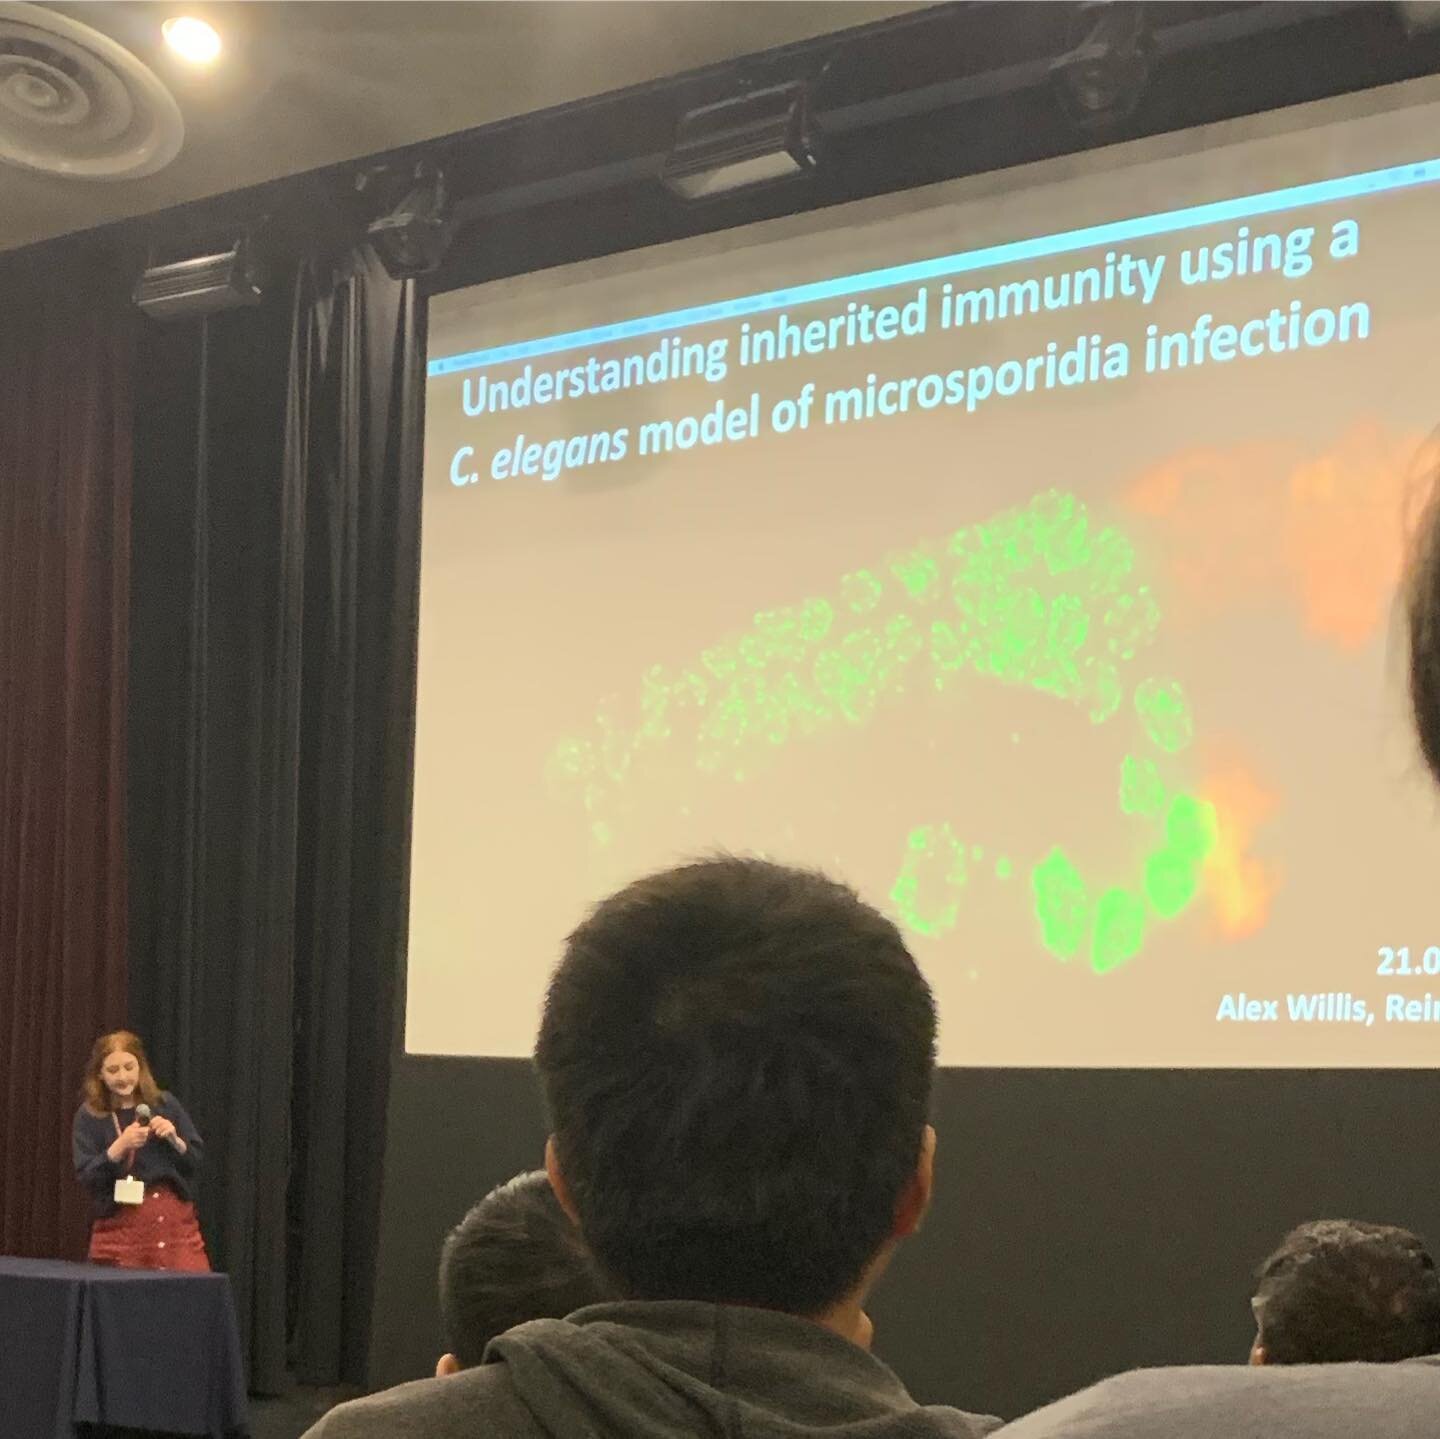 Alex, Winnie, Hala, Calvin and Jihae at the 22nd international worm meeting, spreading the word on how cool Microsporidia is and why C. elegans is a great model to study infection! #worm19